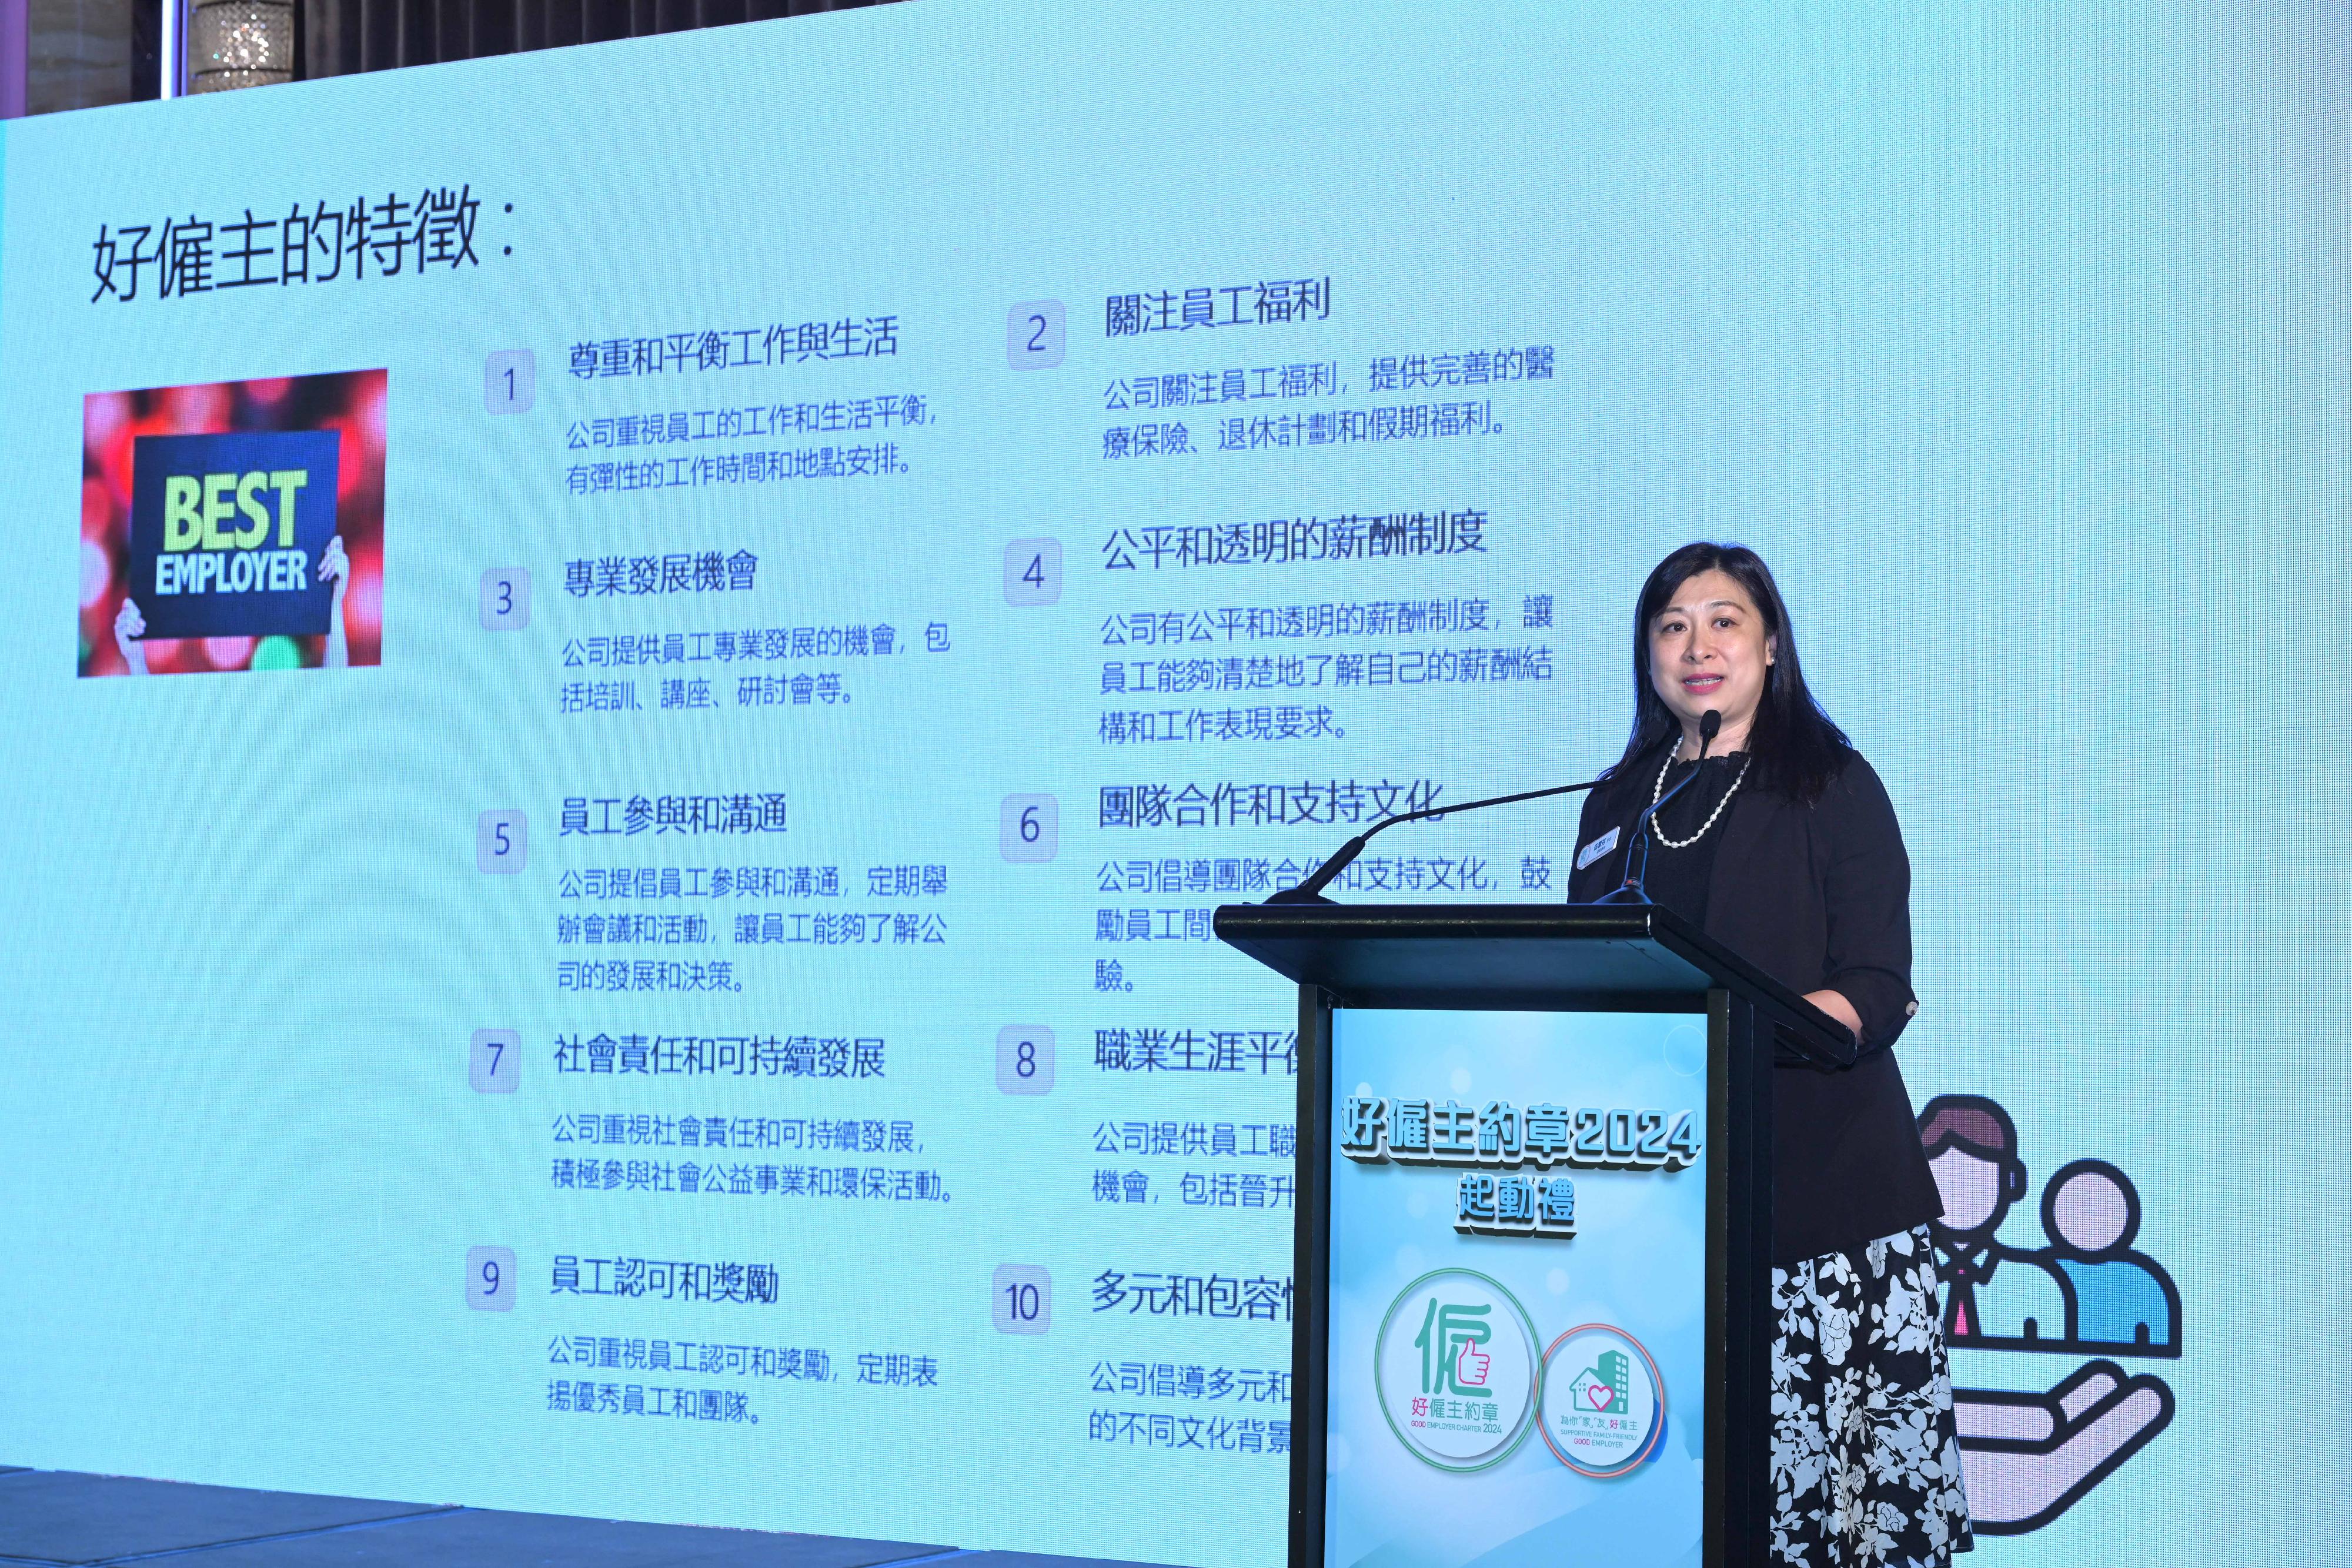 The kick-off ceremony of the Good Employer Charter 2024 was held this afternoon (November 24). Photo shows experienced human resource consultant Ms Eliza Ng speaking at the thematic talk in the event.